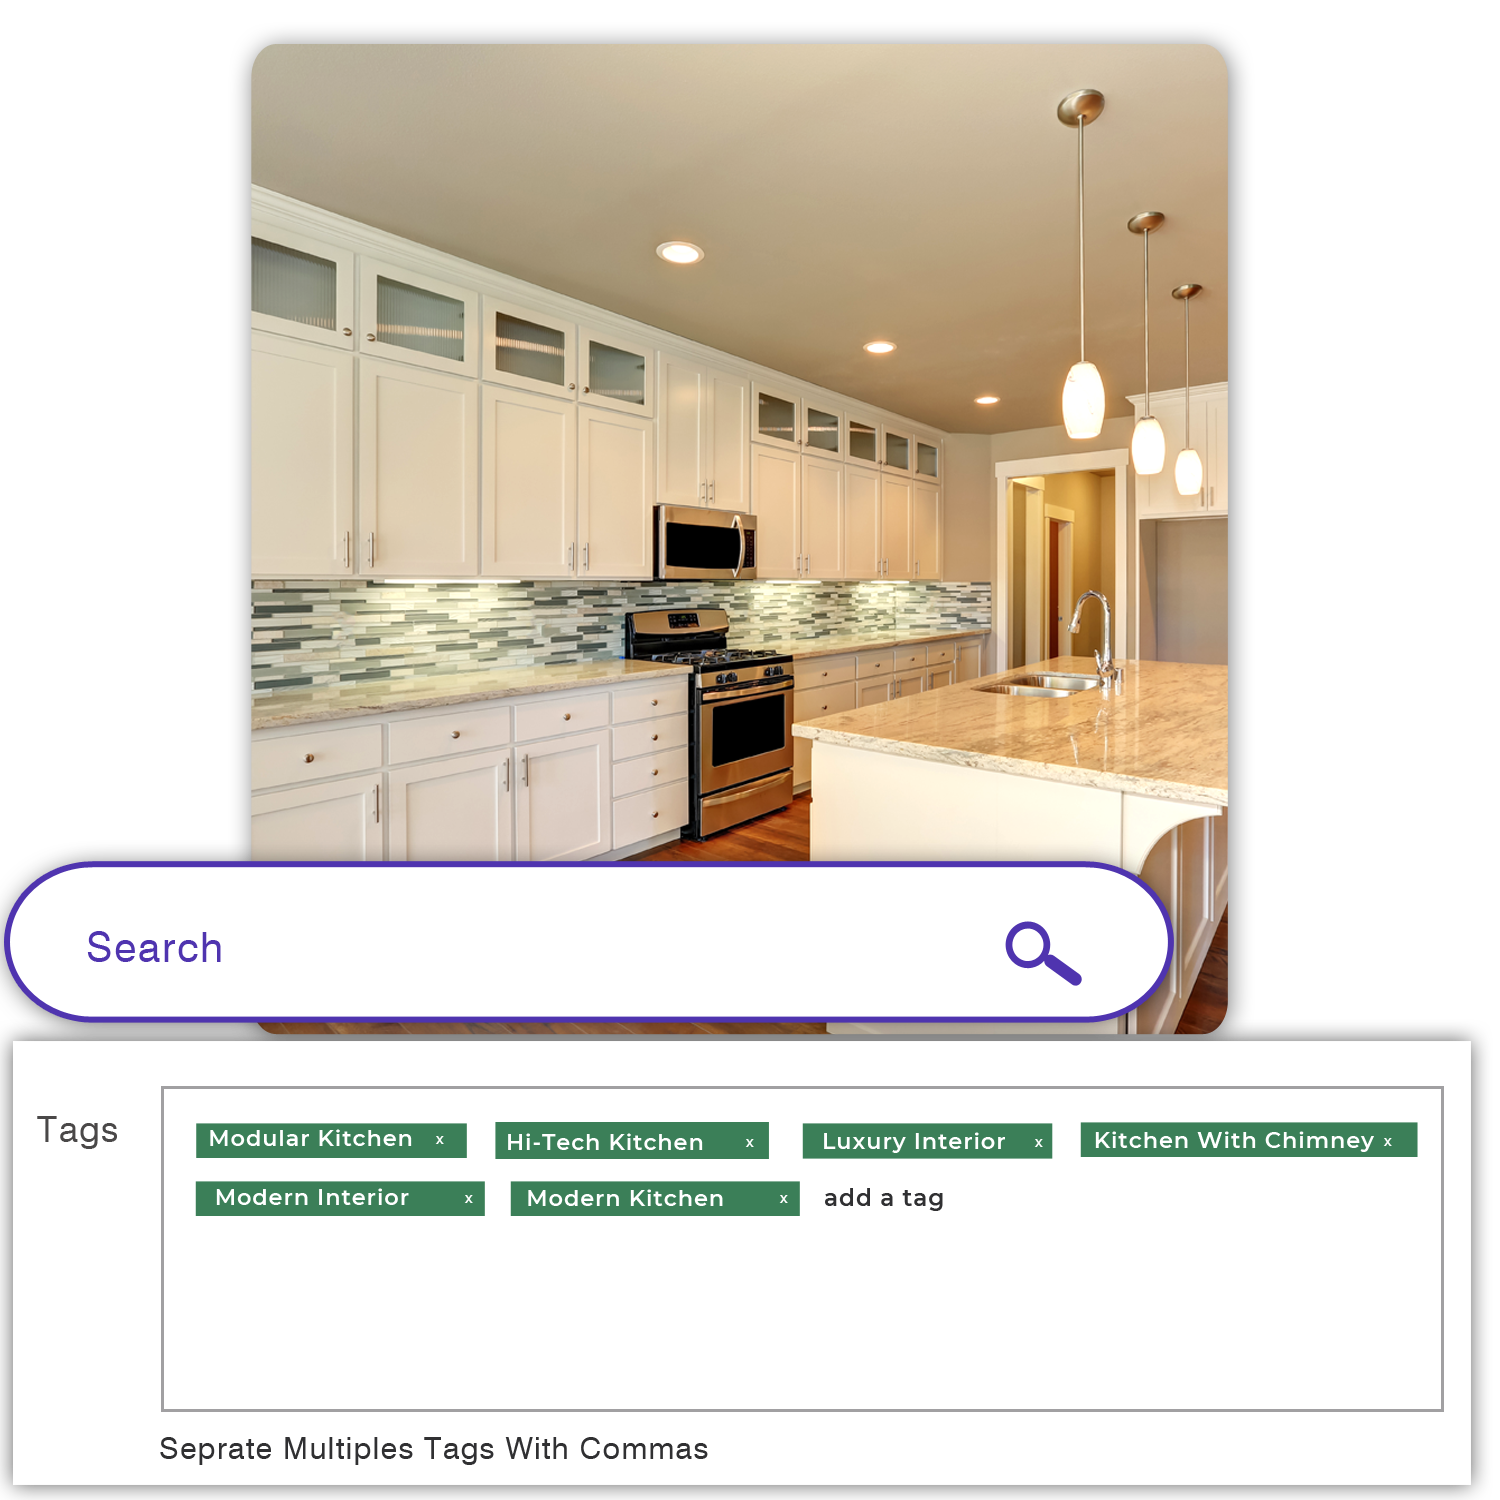 Modular Kitchen image with search tags by VistaShopee - Best website design company